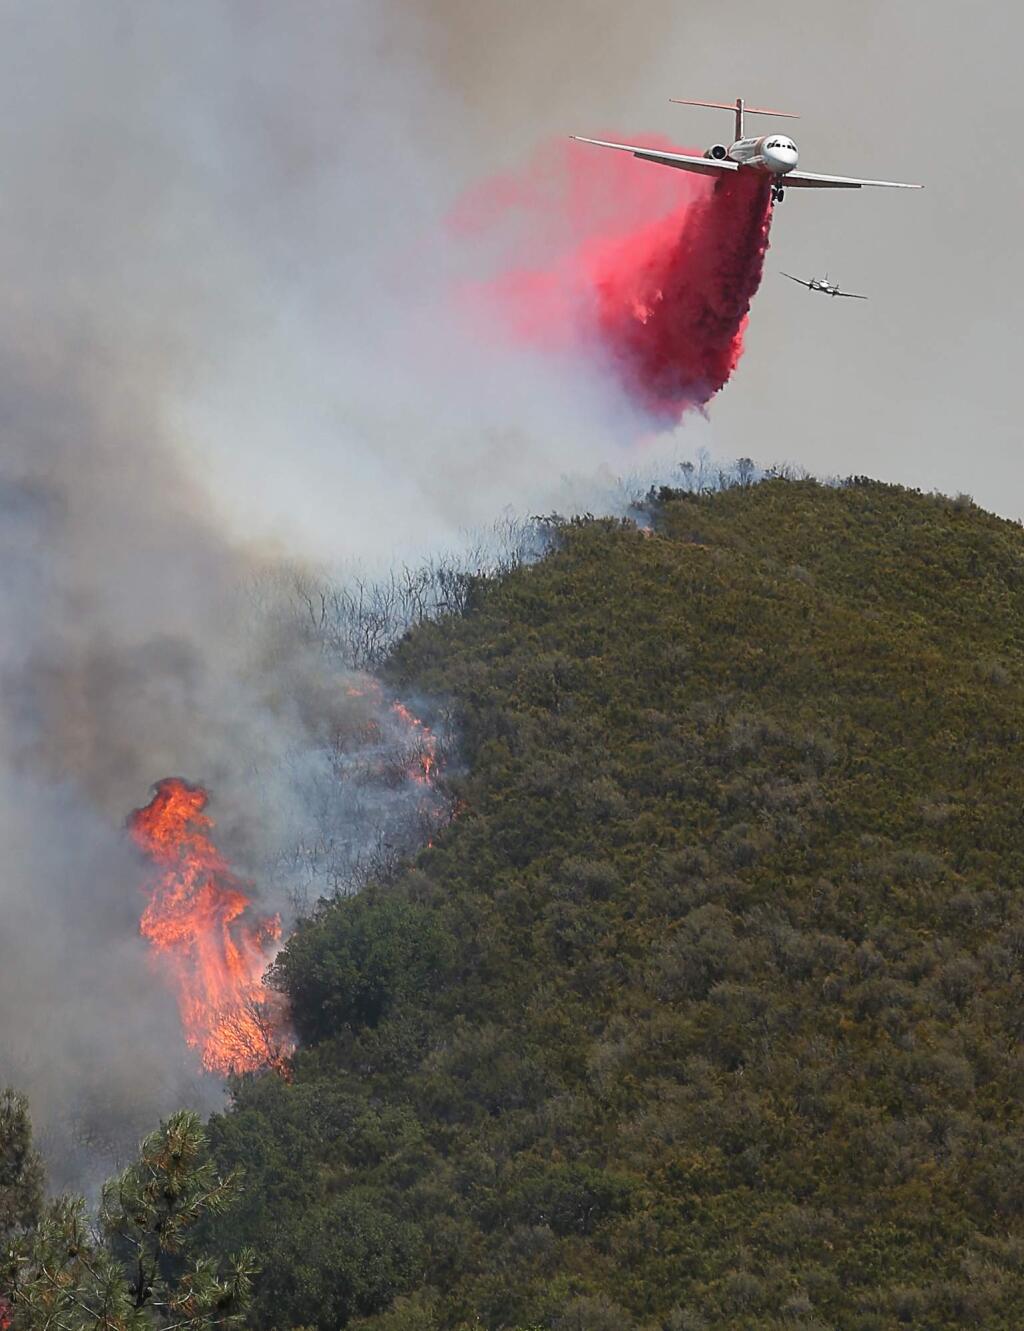 A Cal Fire tanker drops fire retardant near New Long Valley Road in the Pawnee Fire, east ofClearlake Oaks on Monday, June 25, 2018. (Christopher Chung/ The Press Democrat)